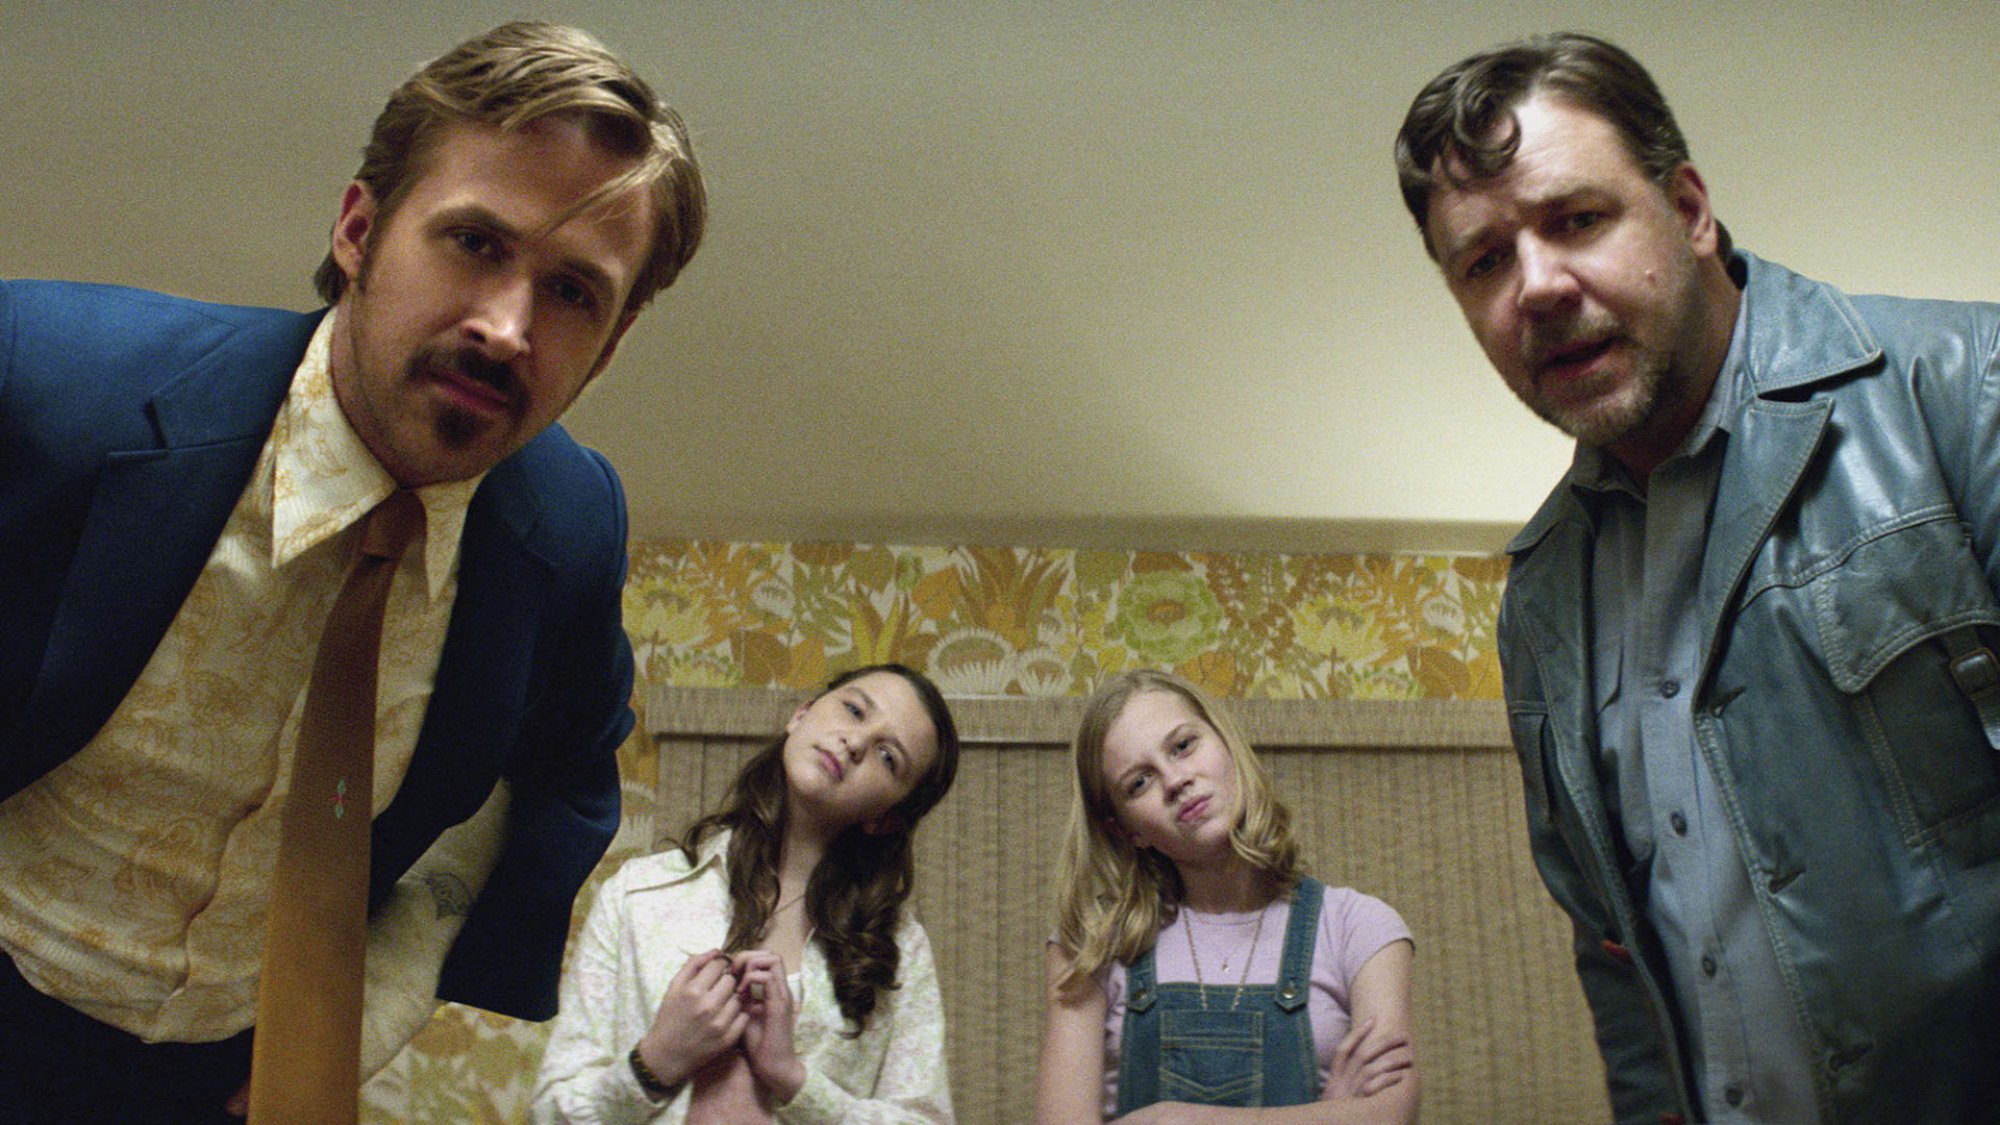 Ryan Gosling, Daisy Tahan, Angourie Rice, Russell Crowe in the film "The Nice Guys"